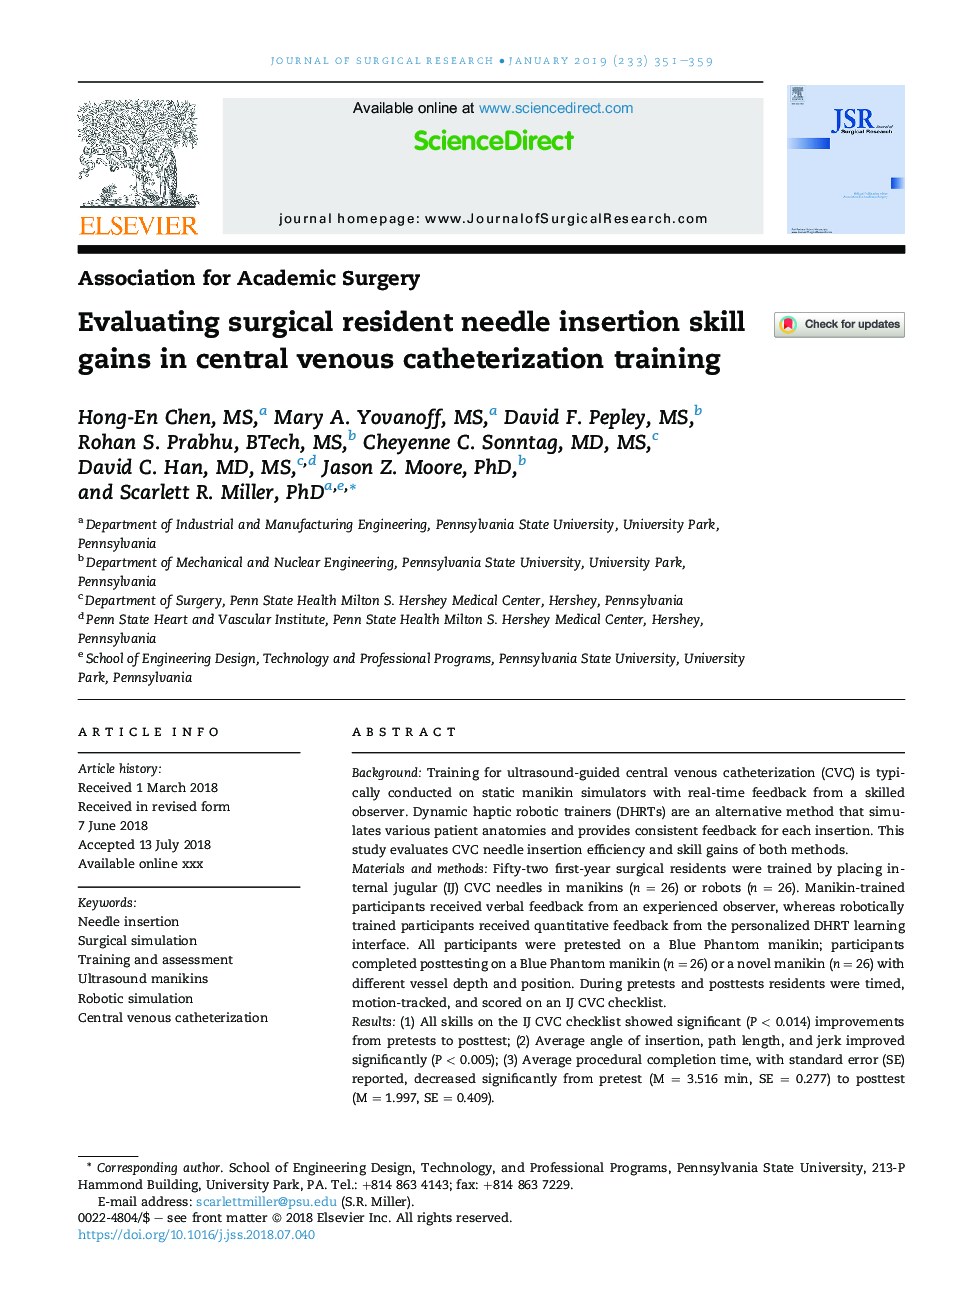 Evaluating surgical resident needle insertion skill gains in central venous catheterization training